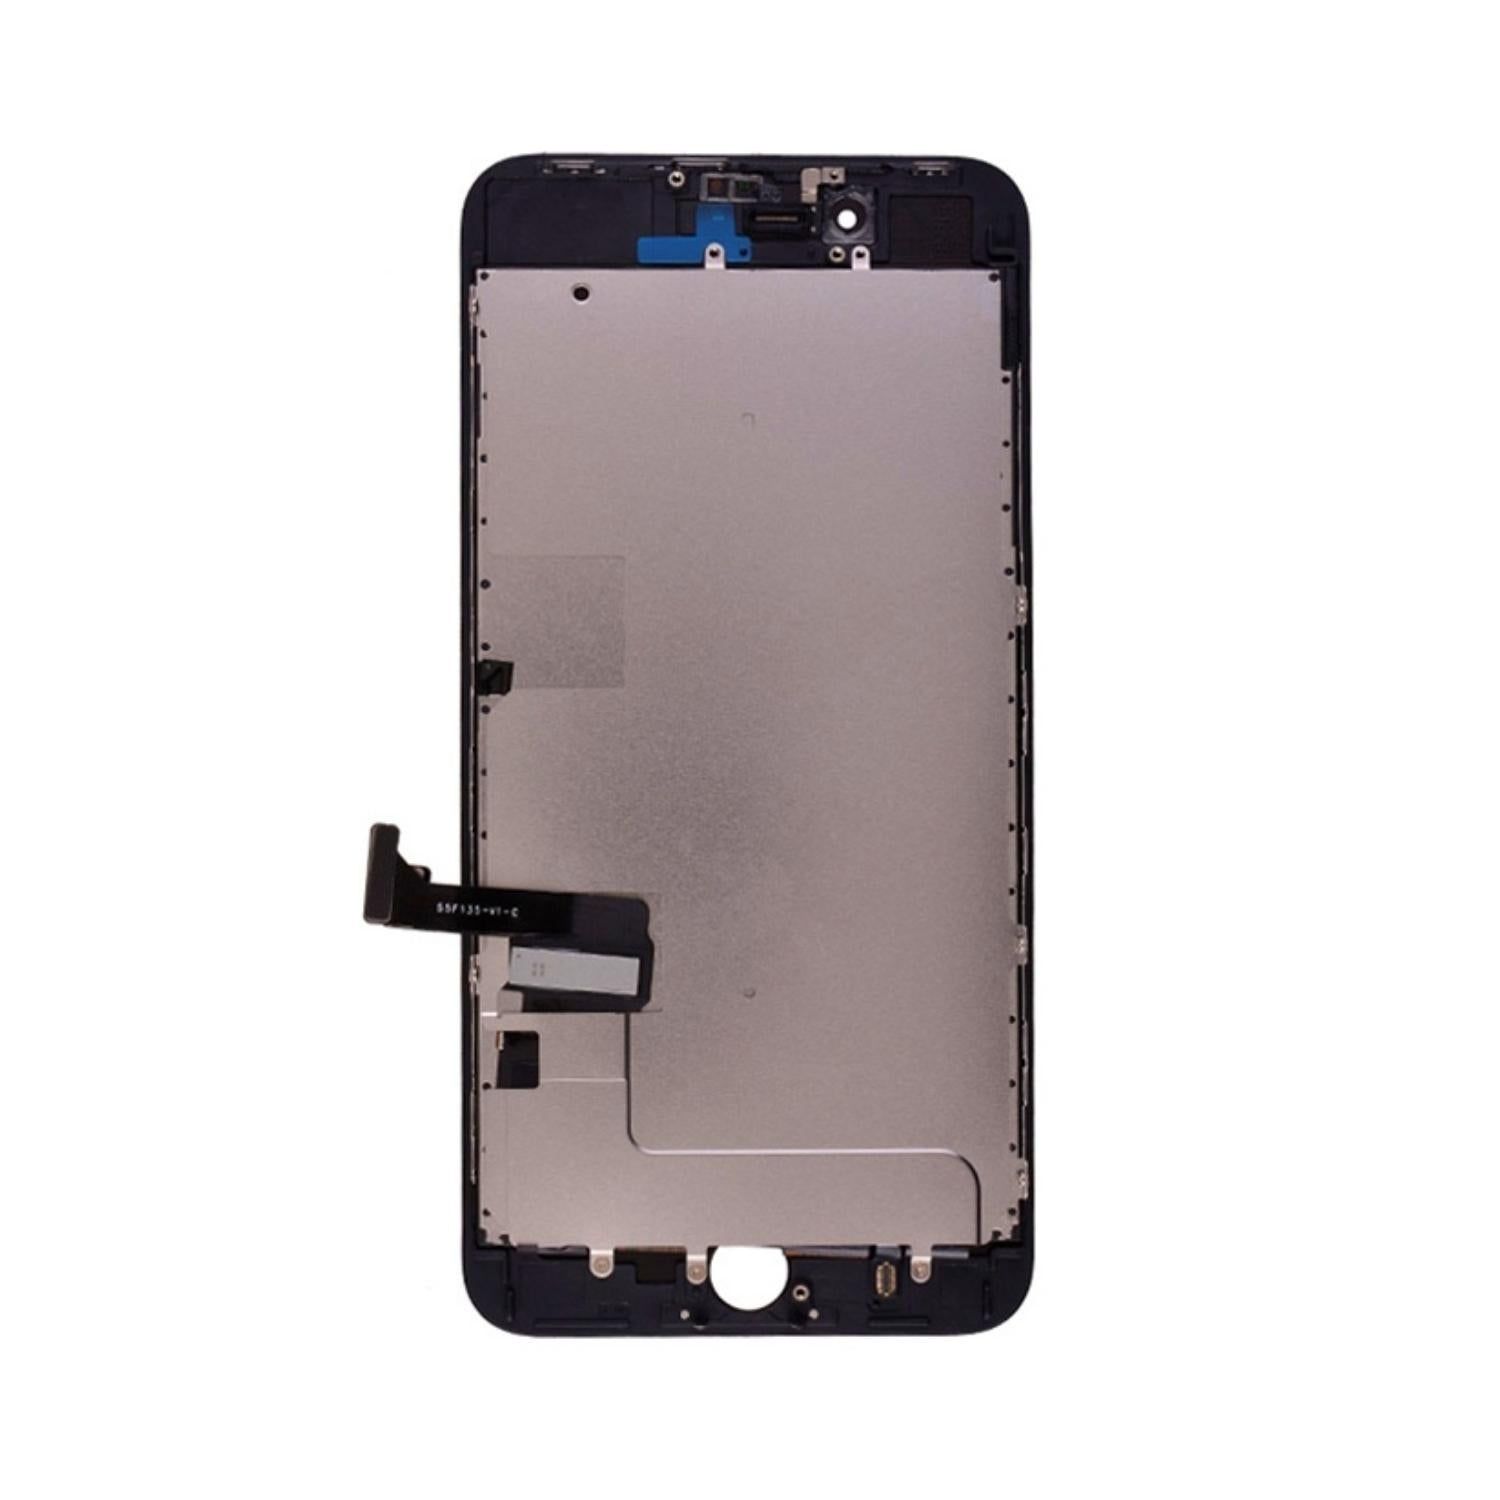 LCD and Digitizer Assembly for iPhone 8 Plus (iQ7) Black (Breakage Coverage)